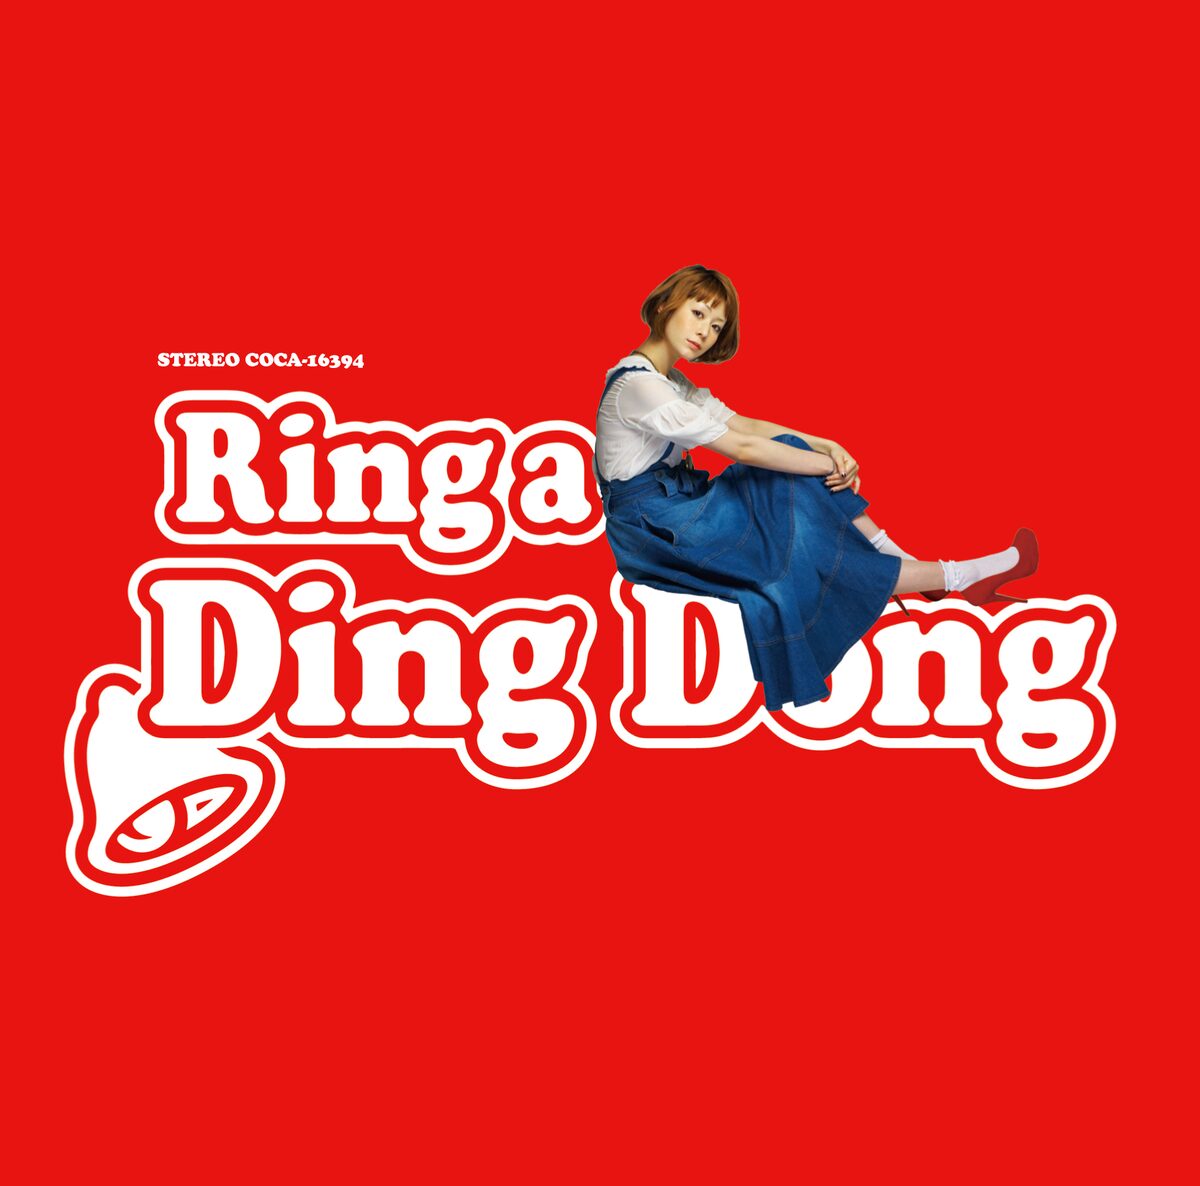 𝟴𝗗 𝗠𝗨𝗦𝗶𝗖 | Ring Ding Dong - Shinee | 𝑈𝑠𝑒 ℎ𝑒𝑎𝑑𝑝ℎ𝑜𝑛𝑒𝑠🎧 -  YouTube